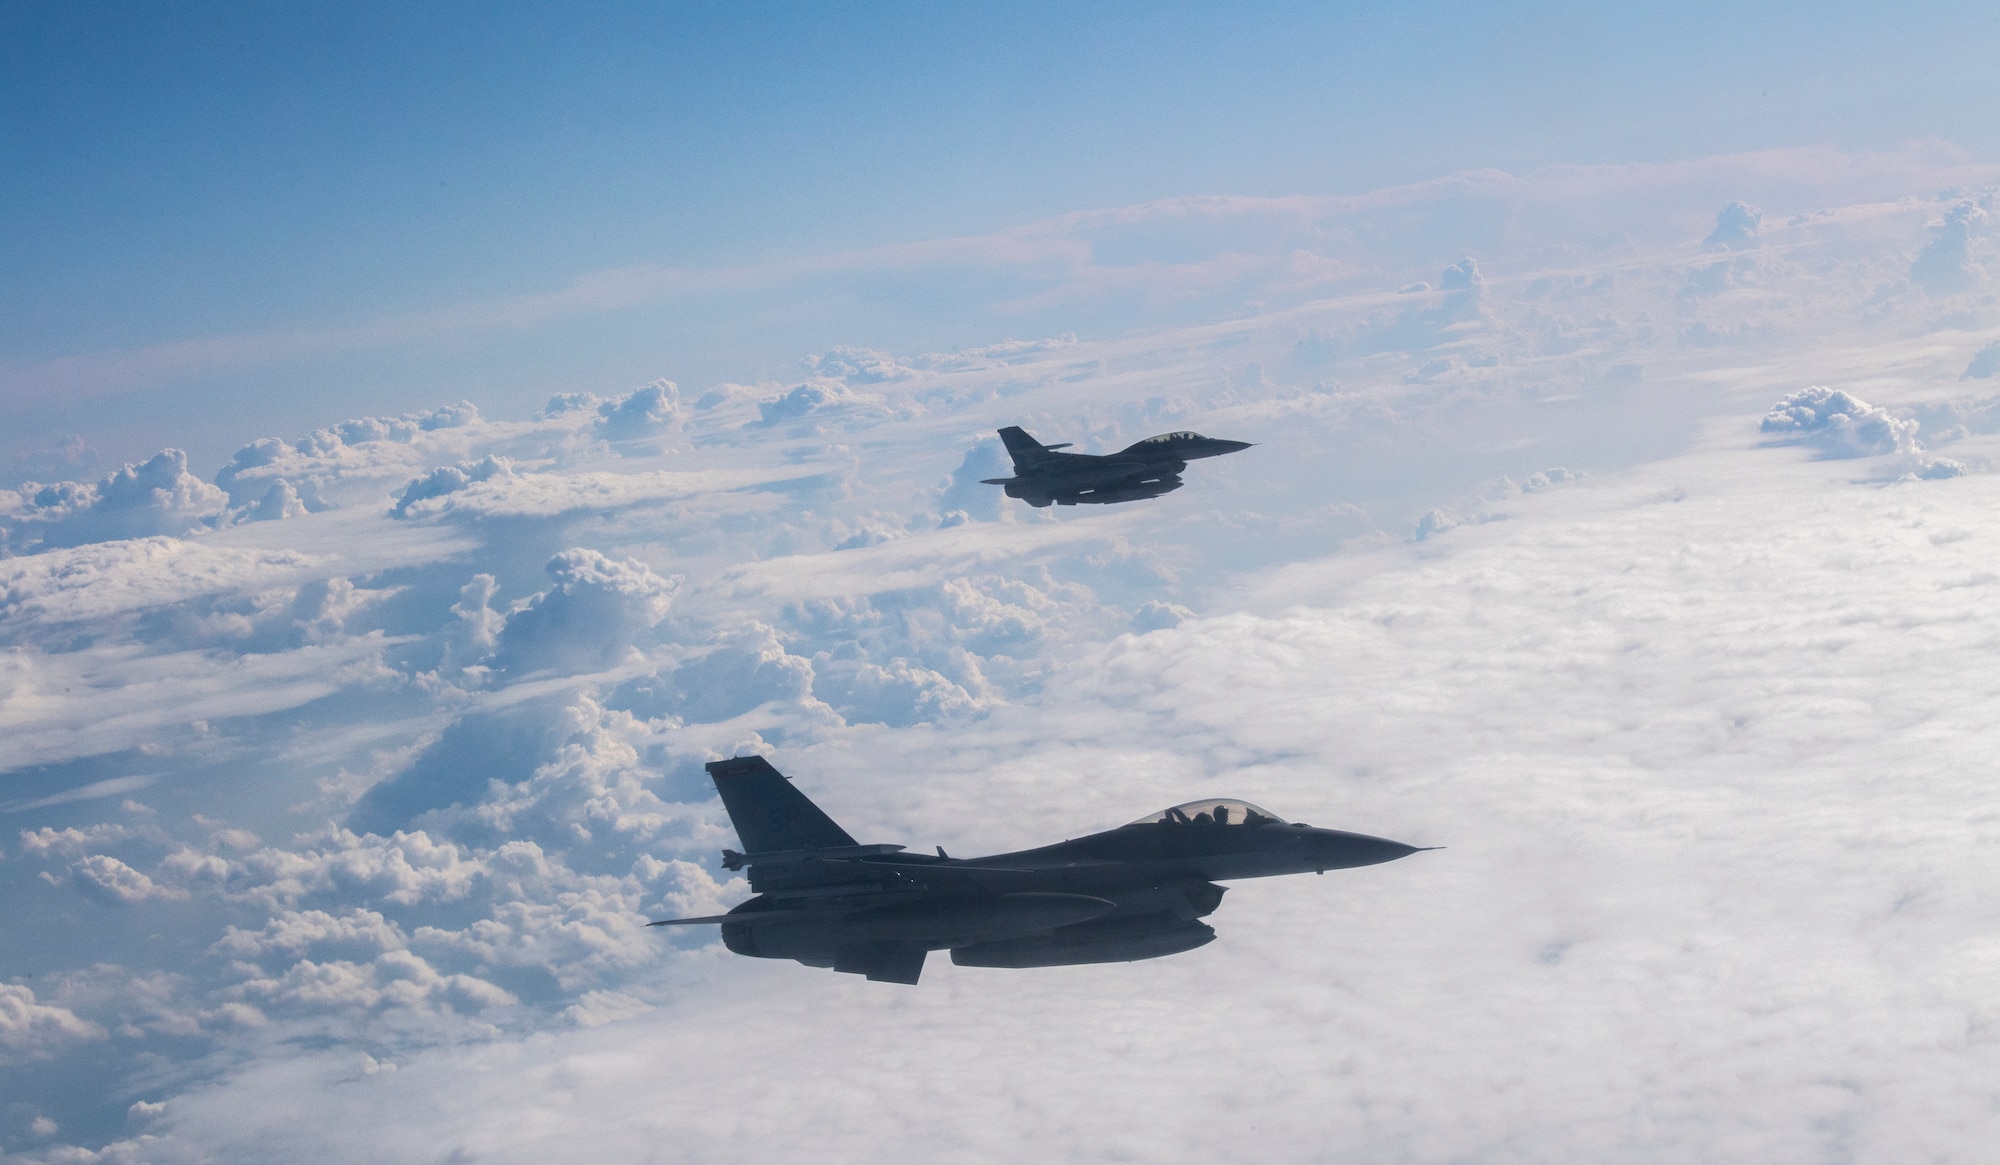 Two U.S. Air Force F-16 Fighting Falcons fly over Polish airspace during exercise Astral Knight, Sept. 24, 2020. Exercise participants included aircraft from U.S. and Polish forces, in which aircraft performed sorties that involved a combination of flight and computer-assisted scenarios during the exercise and utilized a surface-to-air missile system known as Patriot. (U.S. Air Force photo by Airman 1st Class Alison Stewart)